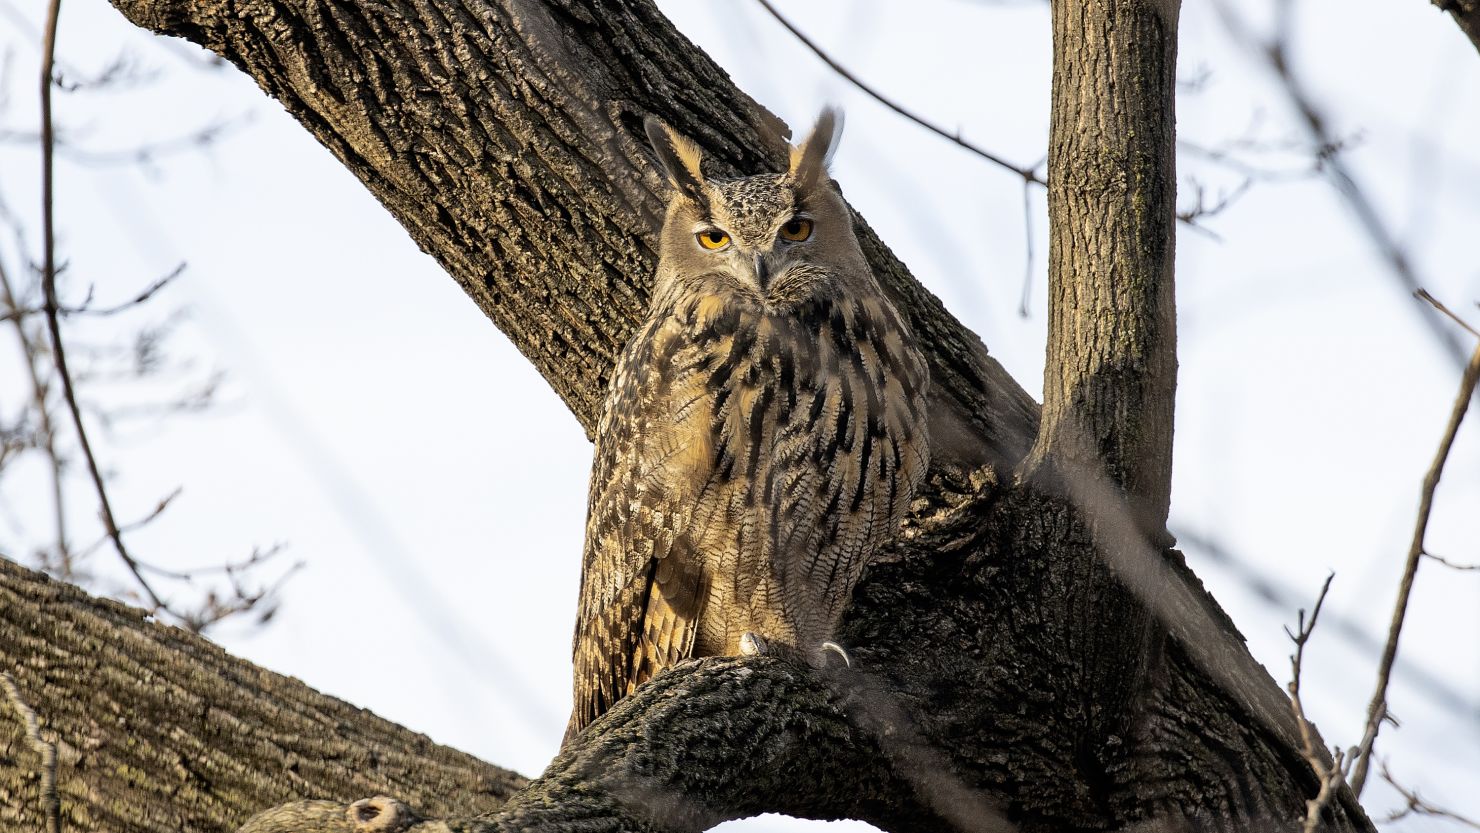 Flaco, a Eurasian eagle-owl that escaped last year from New York's Central Park Zoo, is seen in the park days after the escape.